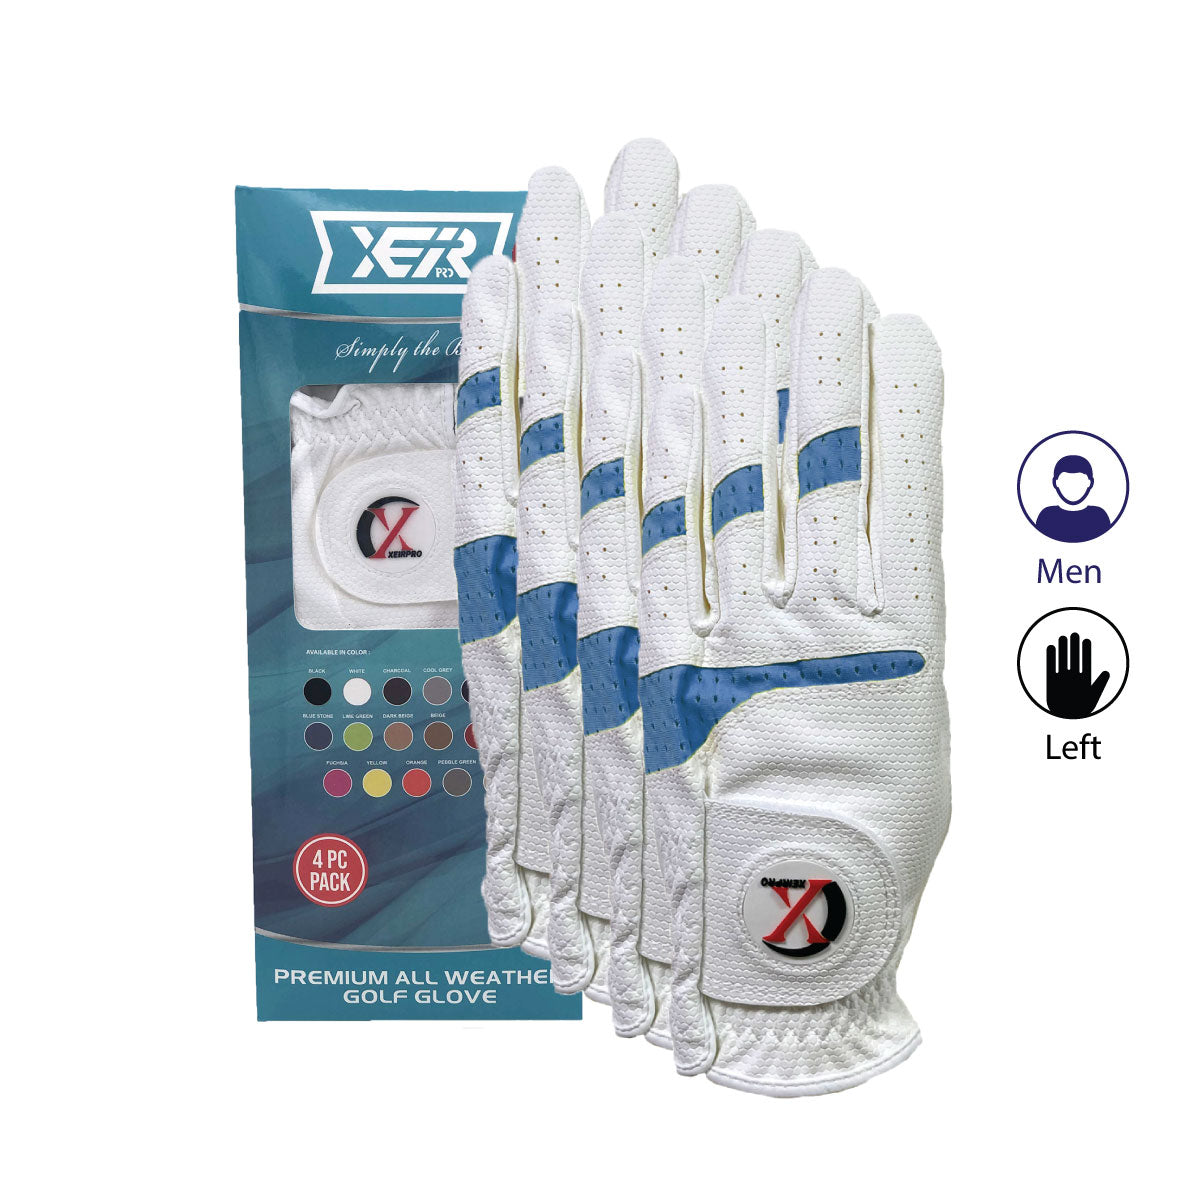 XEIR PRO Premium All Weather Golf Gloves 4 Pack for Men Worn On Left Hand for Right Handed Golfer